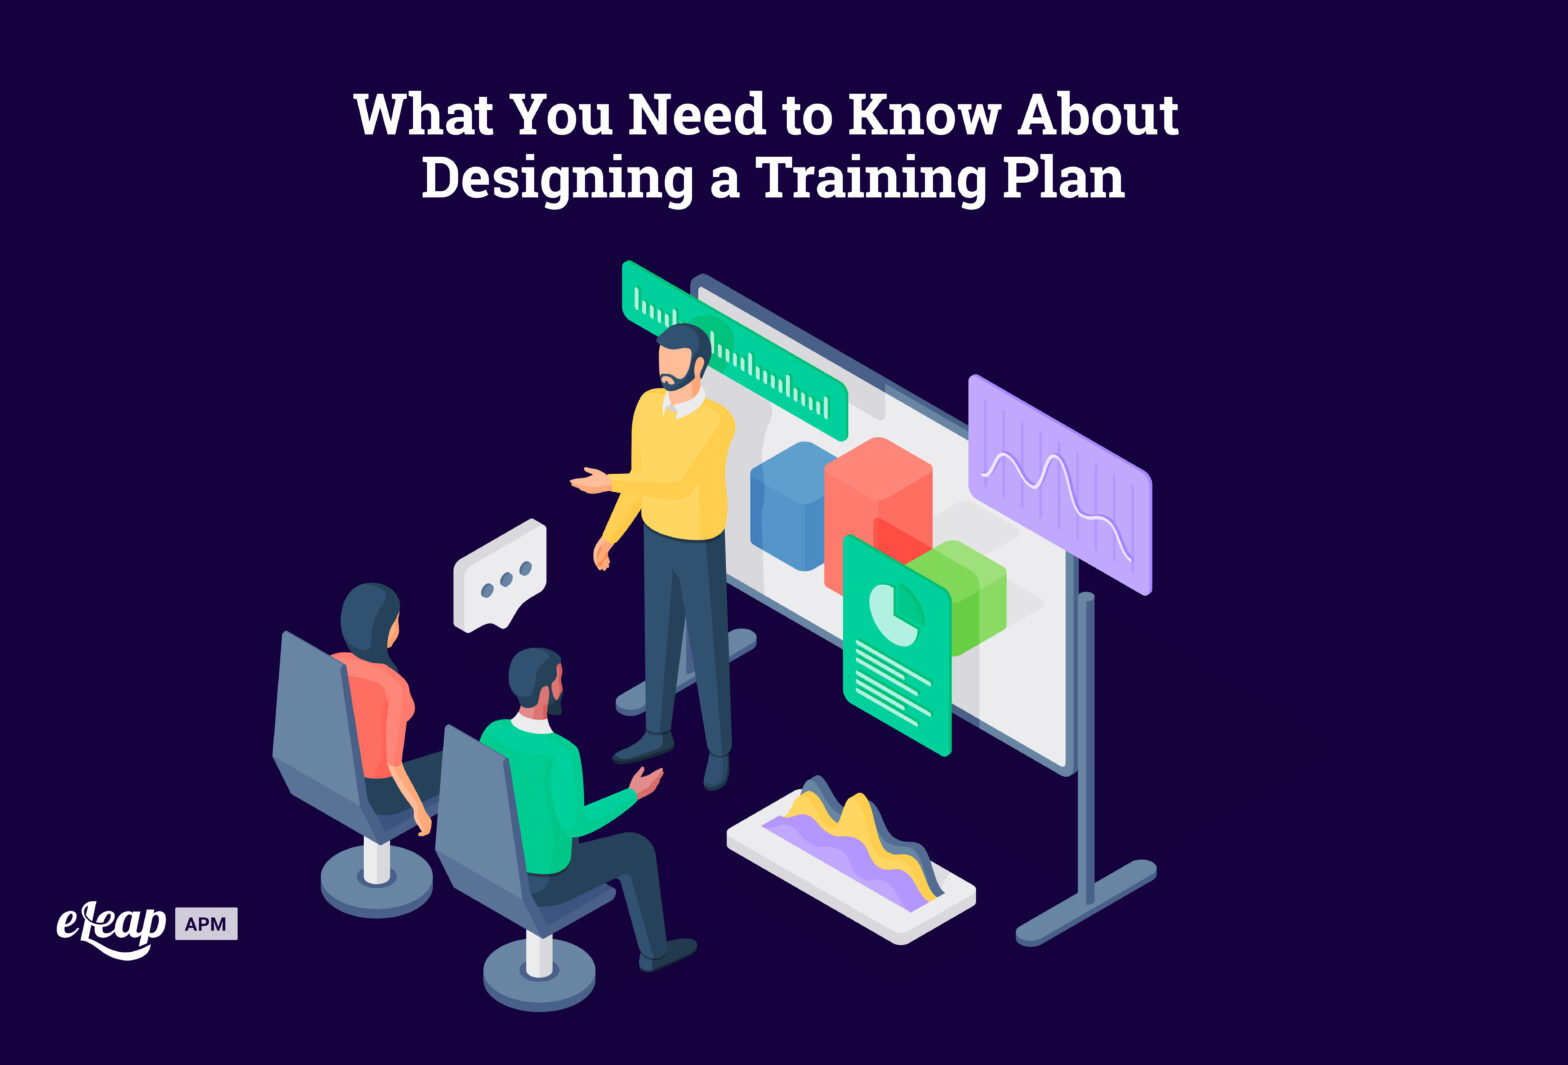 What You Need to Know About Designing a Training Plan